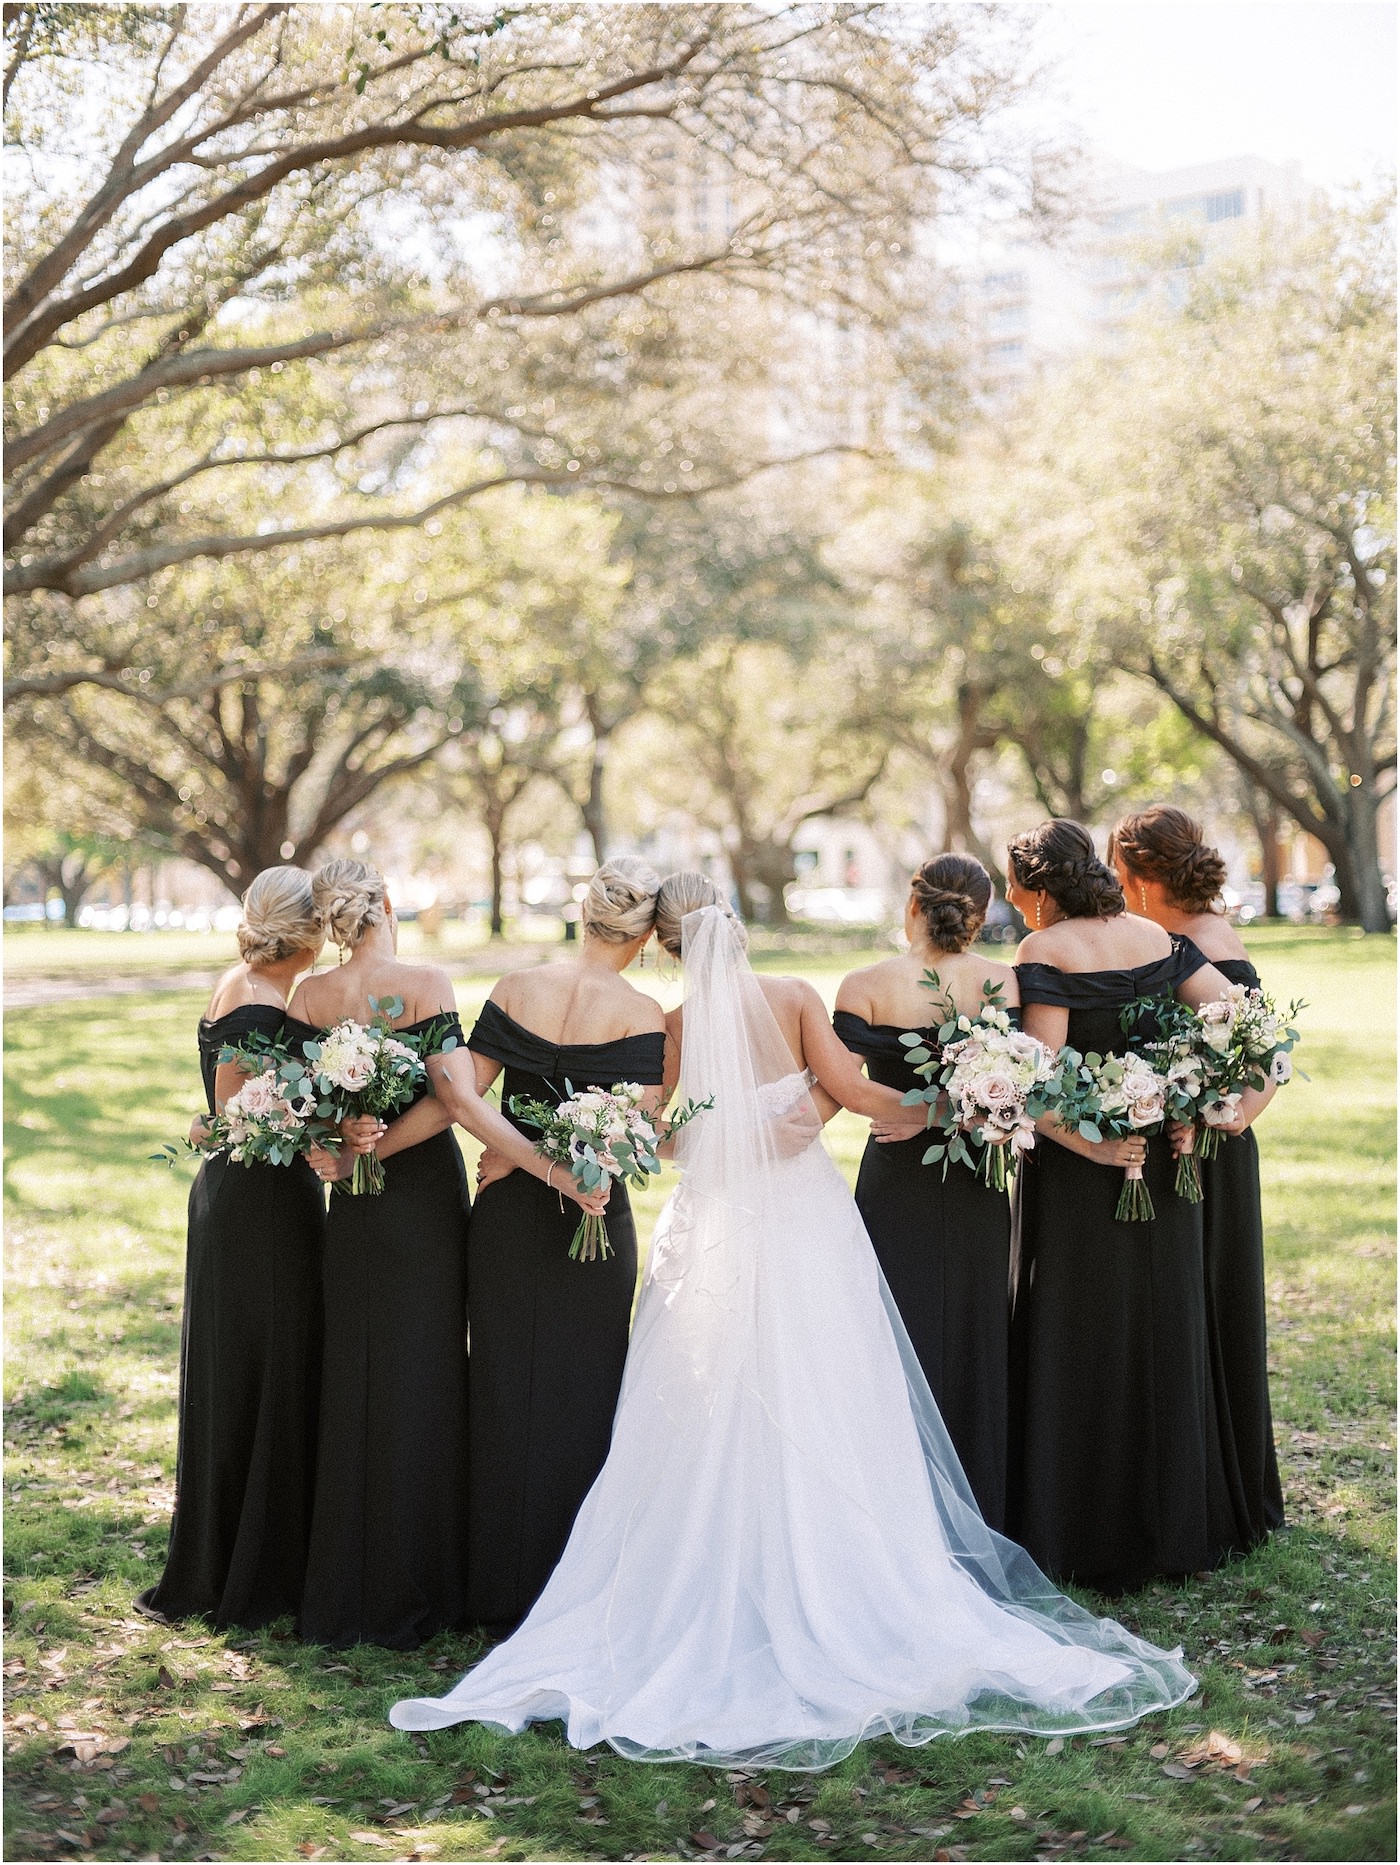 Bride and Bridesmaids Outdoor Portraits | Black Long Bridesmaid Dresses with Black and White Anemone and Greenery Bouquets | Tampa Bridesmaids Dress Store Bella Bridesmaids